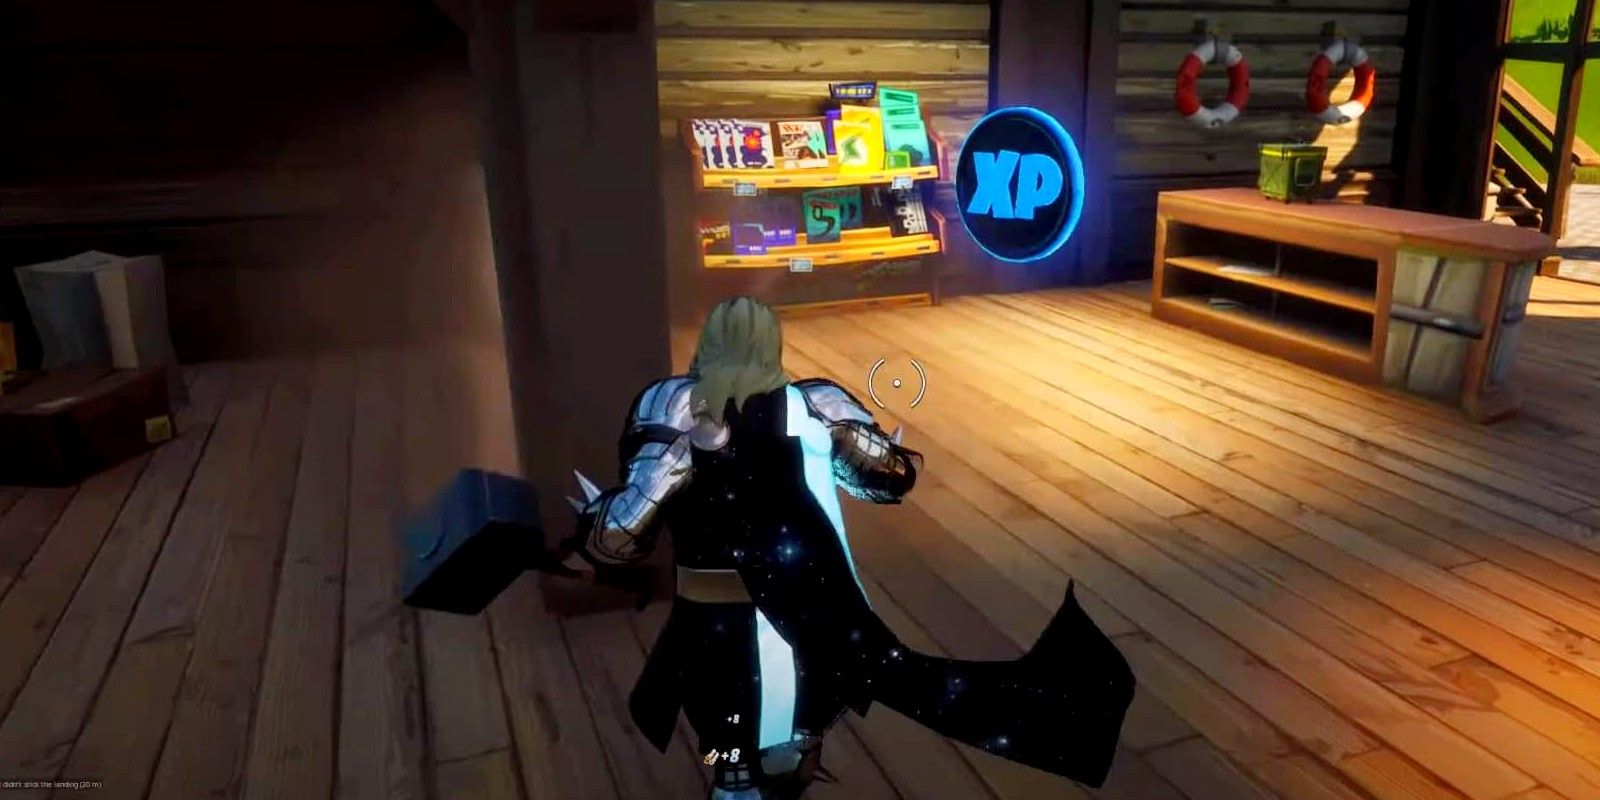 A player uses the Thor skin and finds a blue XP coin from Week 2 of Fortnite Season 4 in the Bait Shop at Misty Meadows